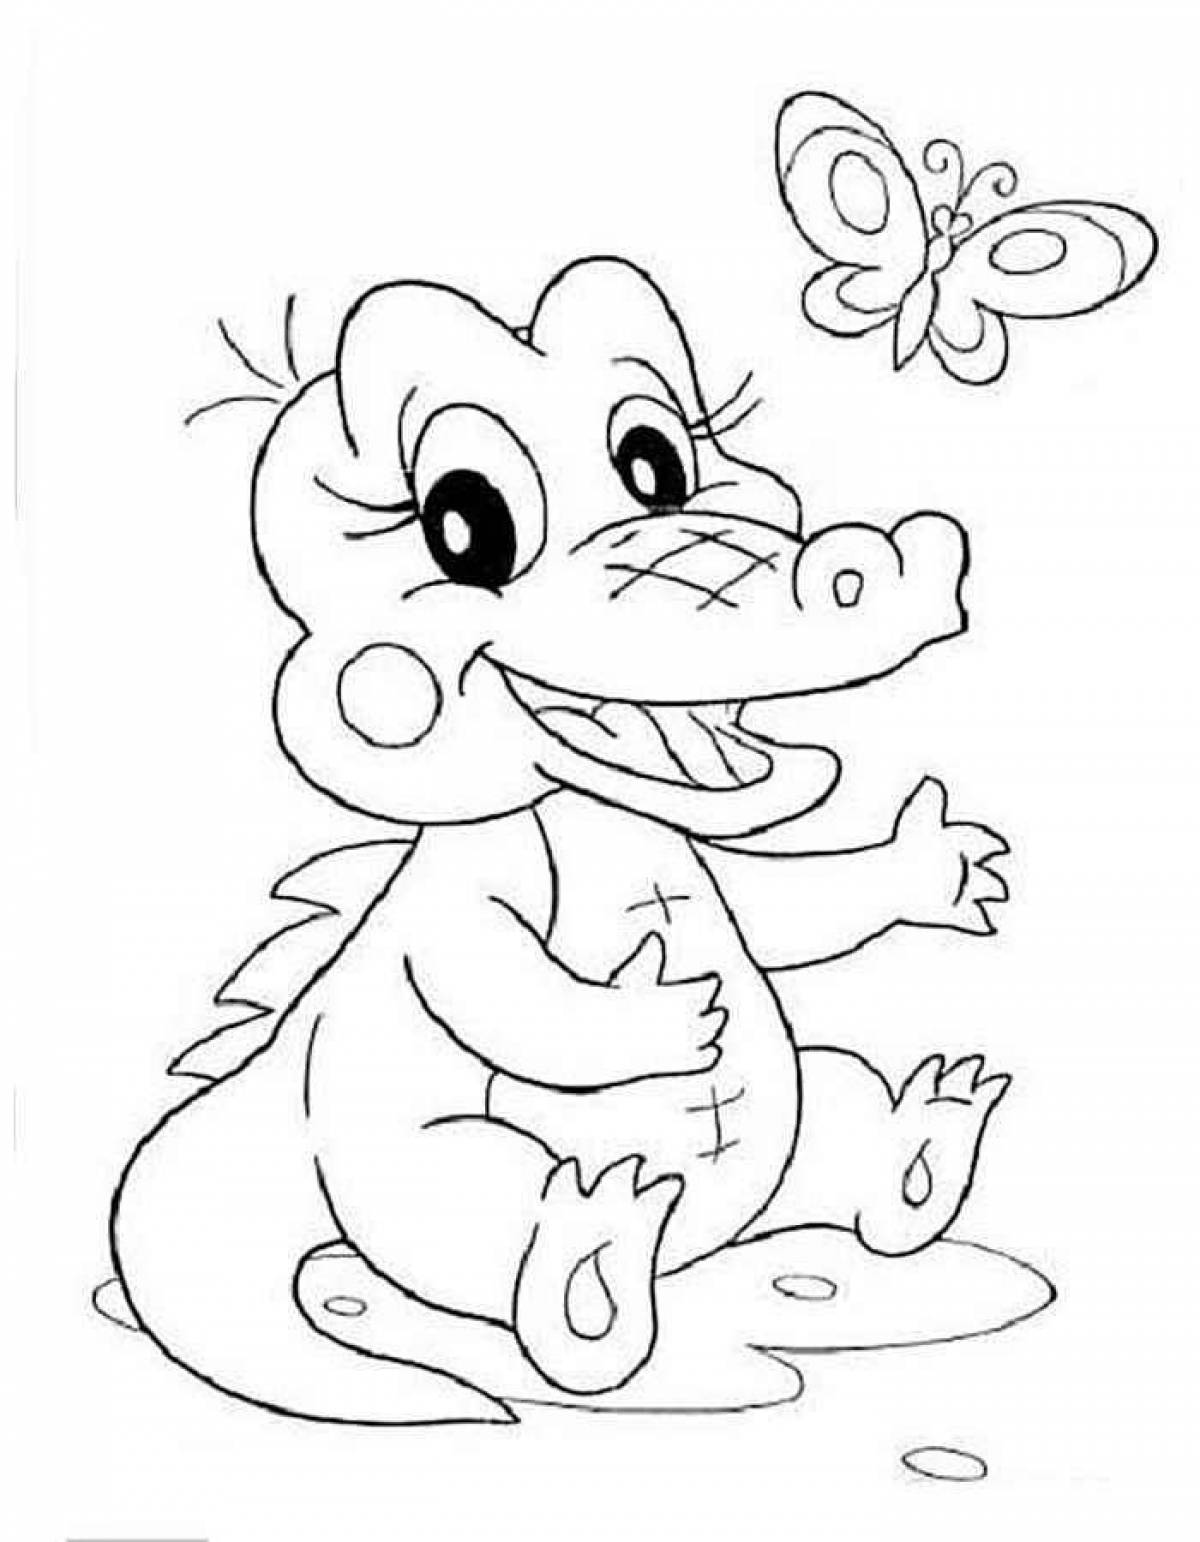 Fancy animal coloring pages for kids 5-7 years old